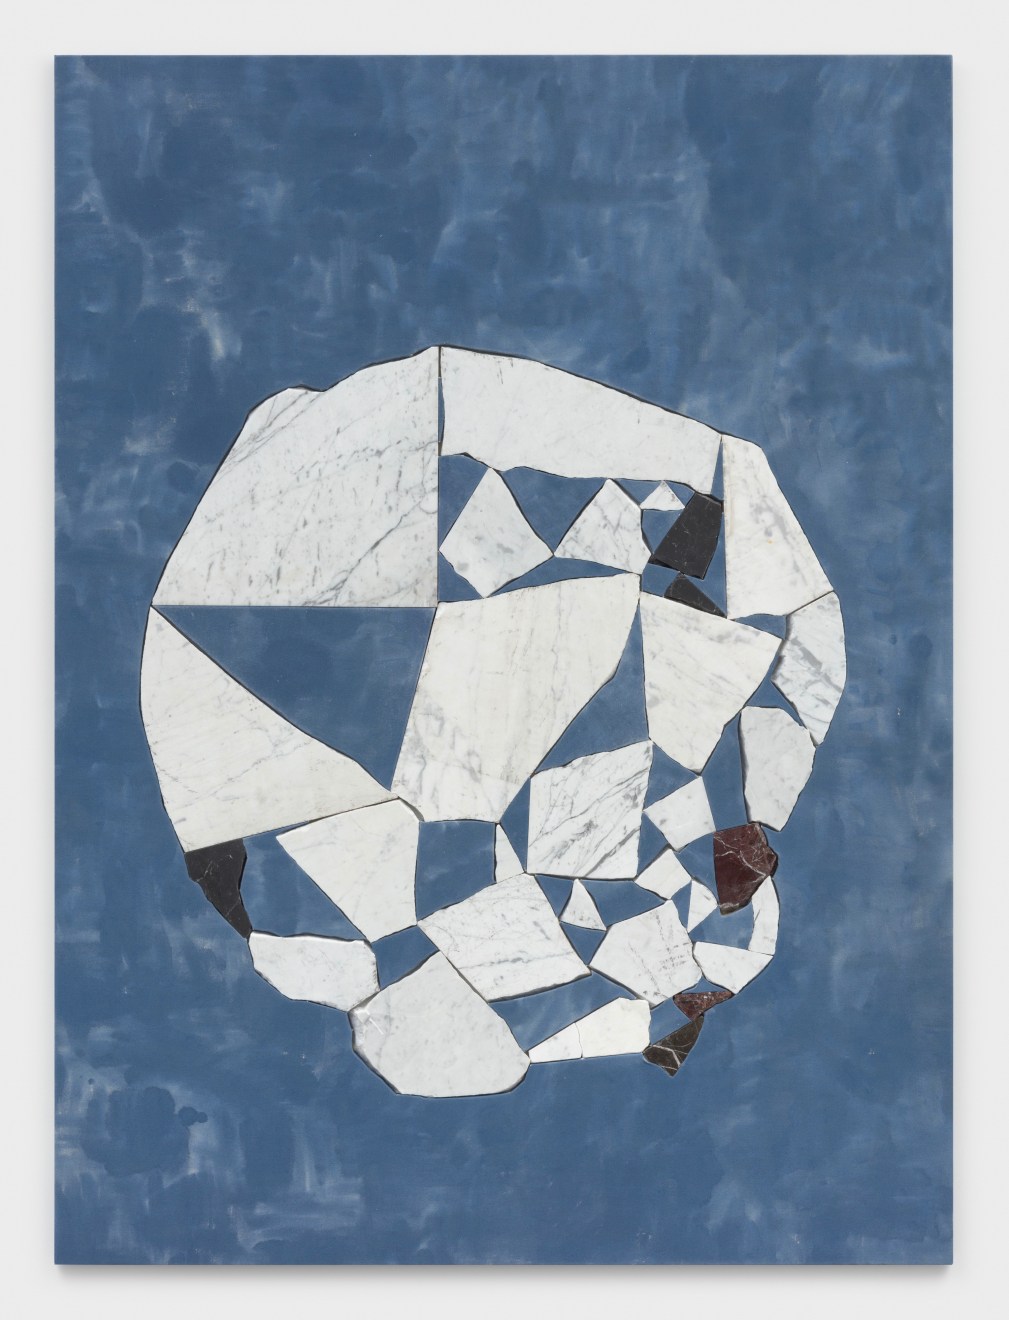 SAM MOYER,&nbsp;World, 2020, the work is accompanied by a signed certificate of authenticity, marble and hand painted canvas mounted to MDF, 66 x 49 x 1 1/2 inches (167.6 x 124.5 x 3.8 cm), SM-P.20.1355